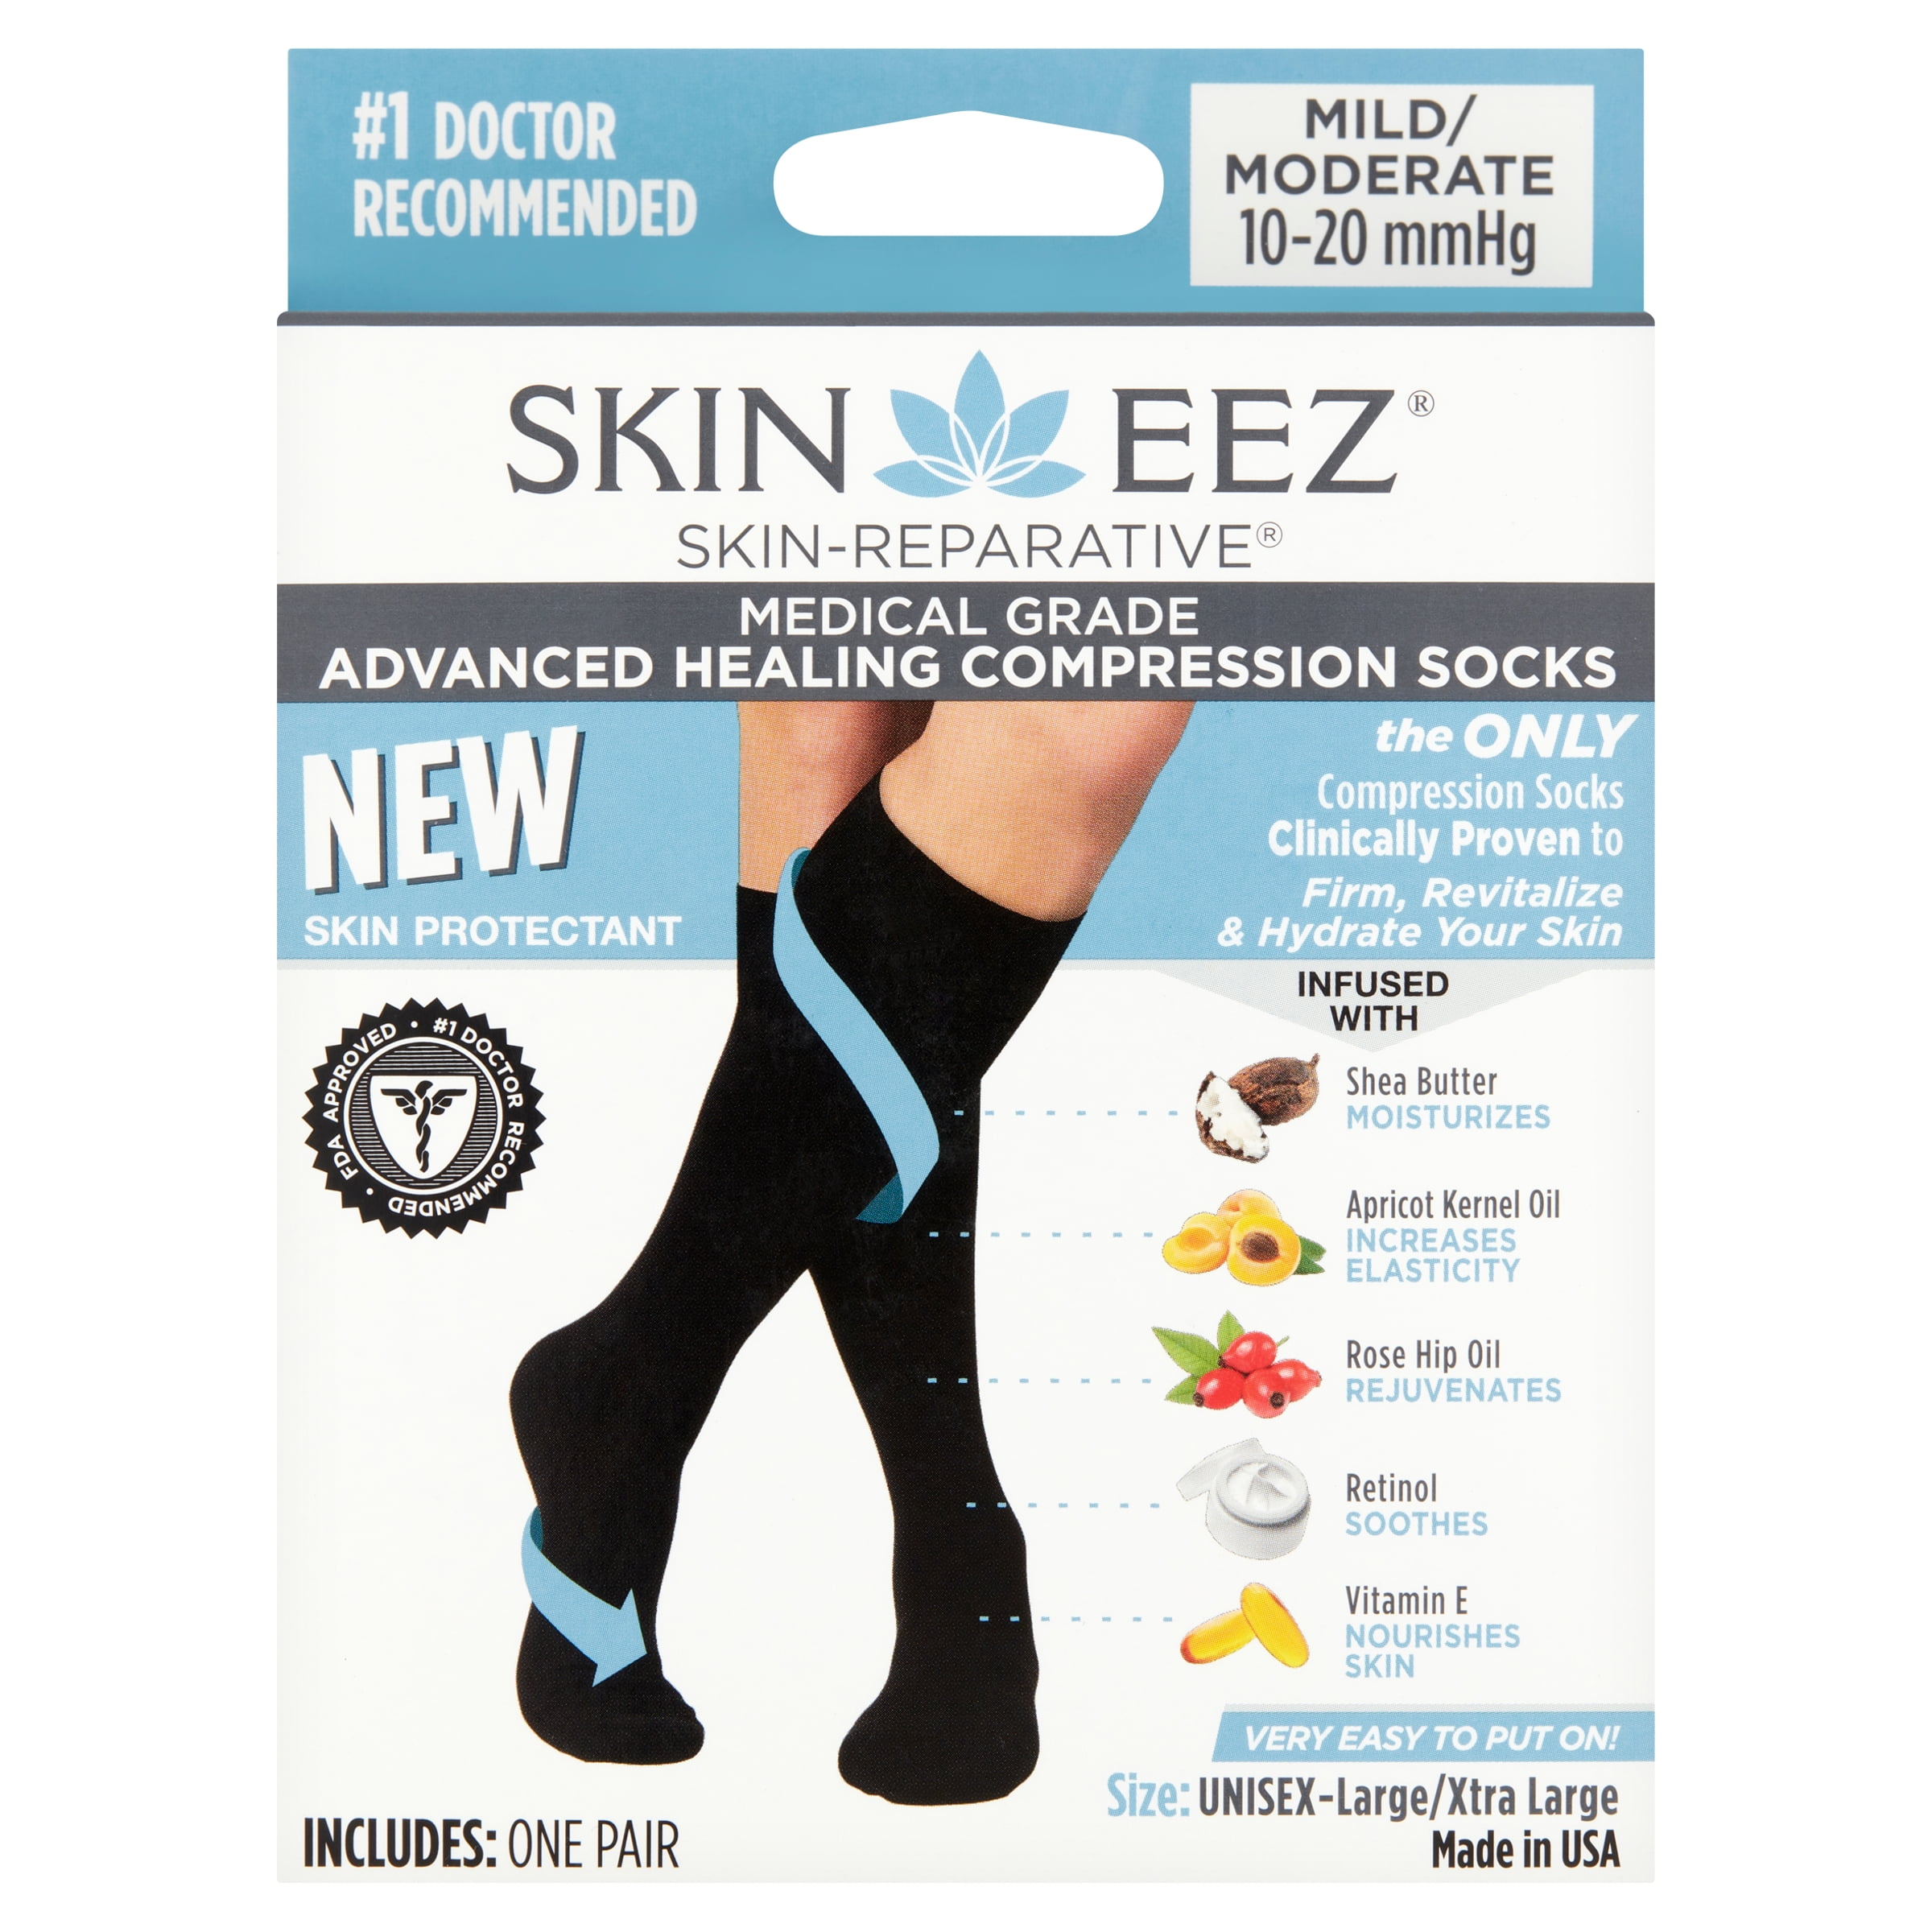 Compression socks with zippers? Why we don't recommend them. – For